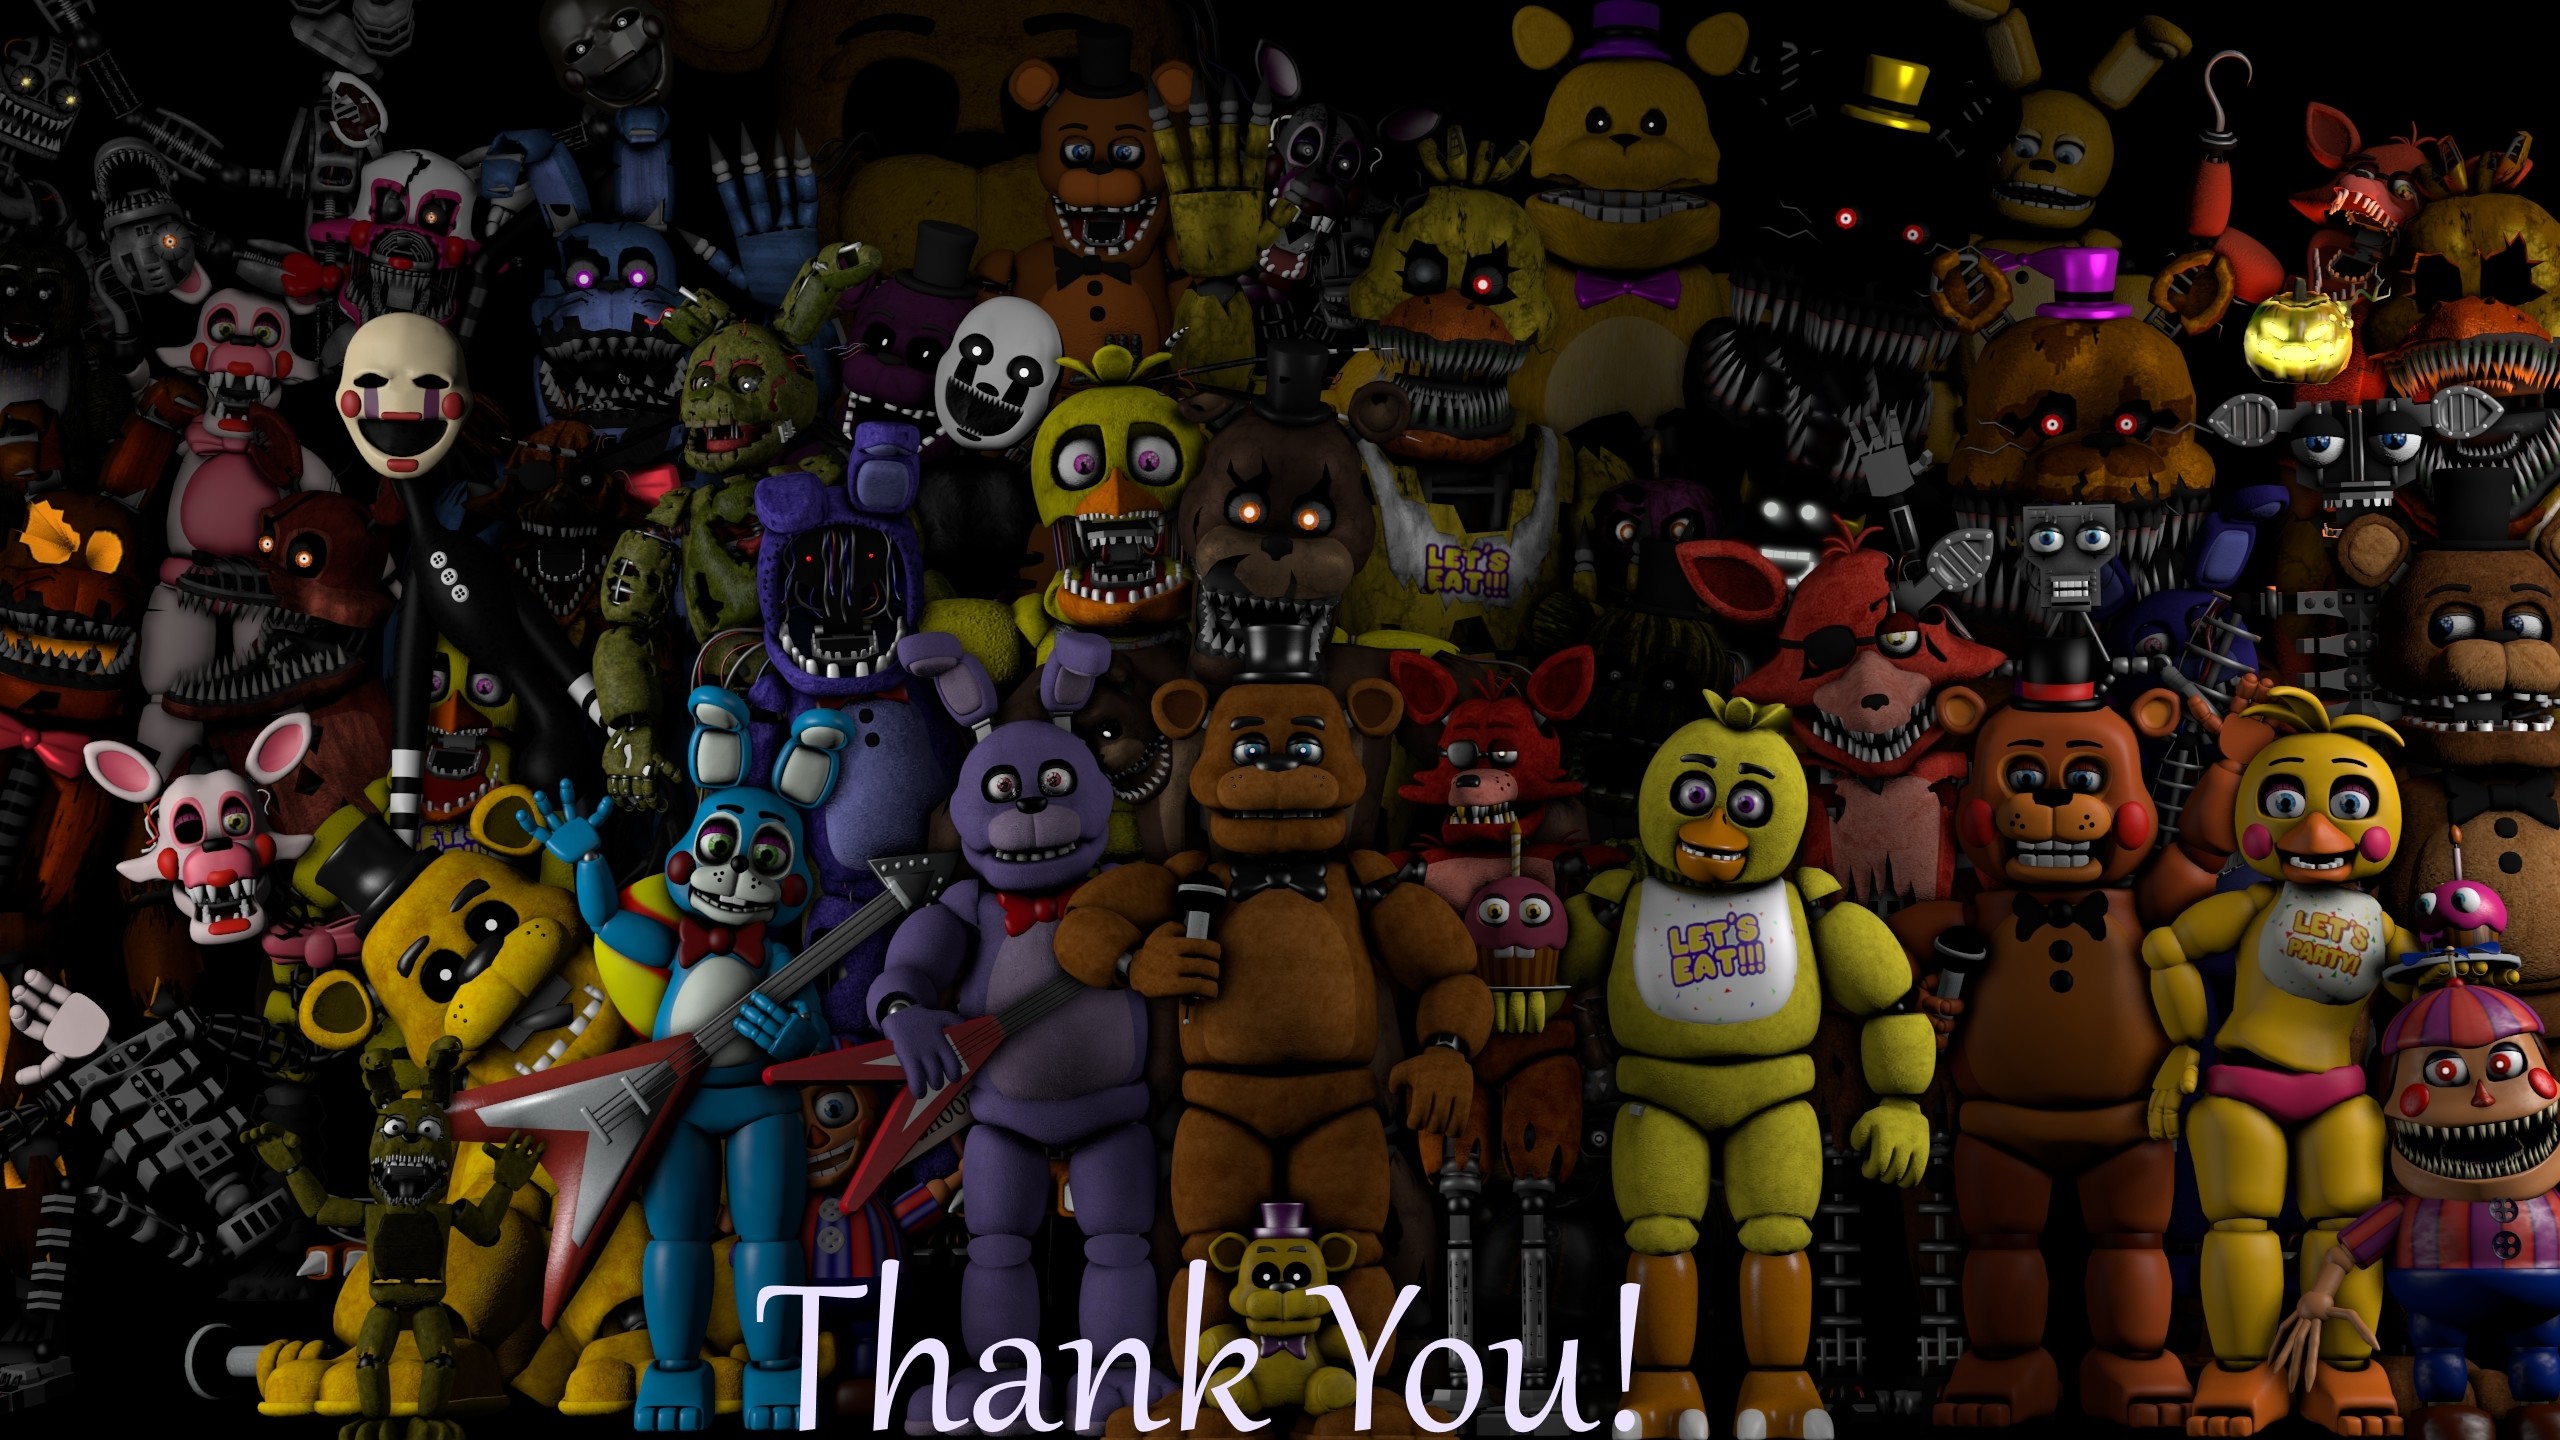 2560x1440 ... SpringTrapGames Thank You! remake of a remake by SpringTrapGames